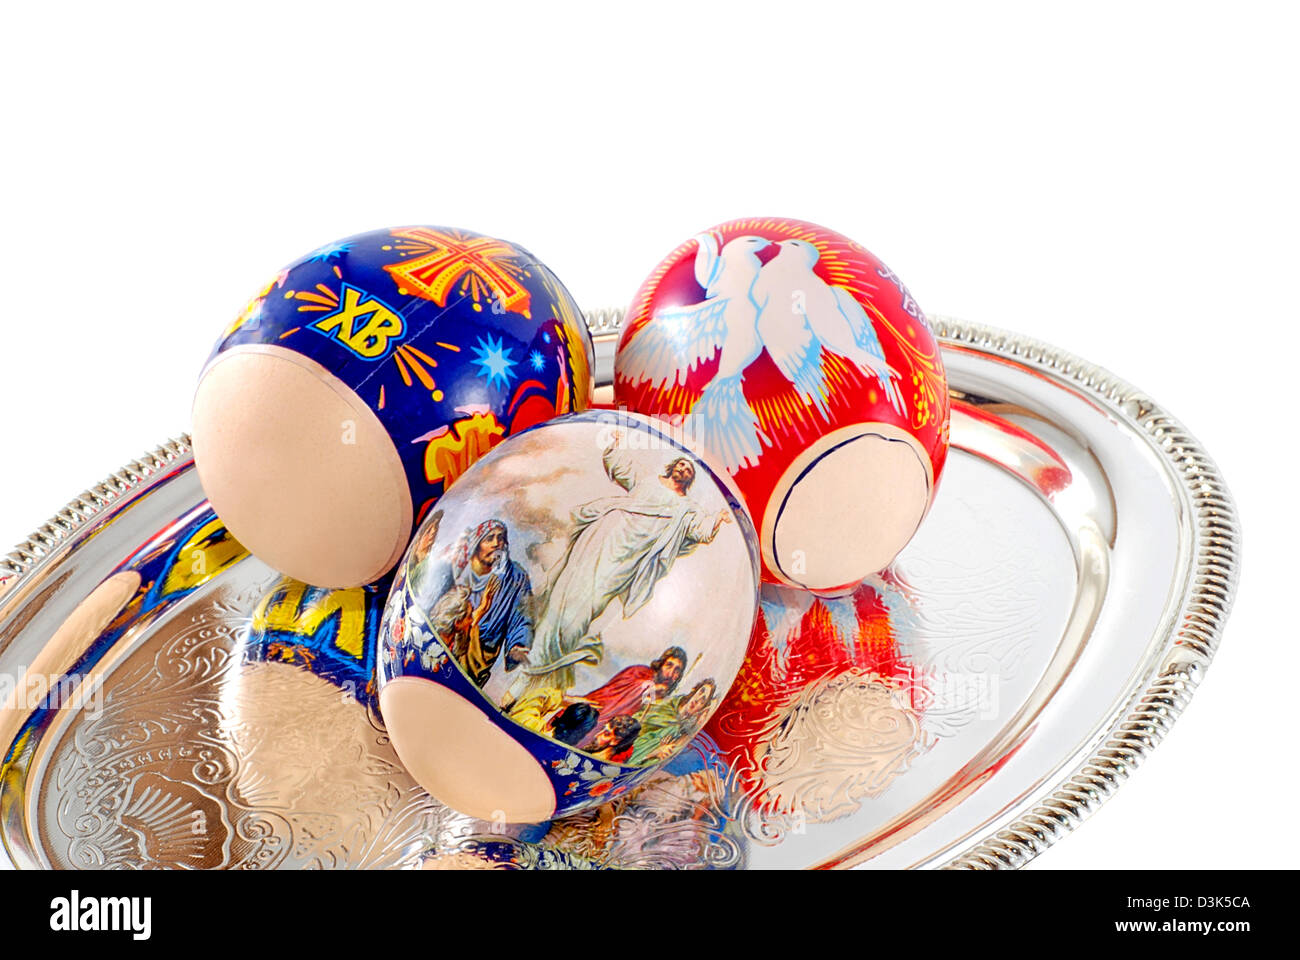 Easter eggs are photographed on a silver dish Stock Photo